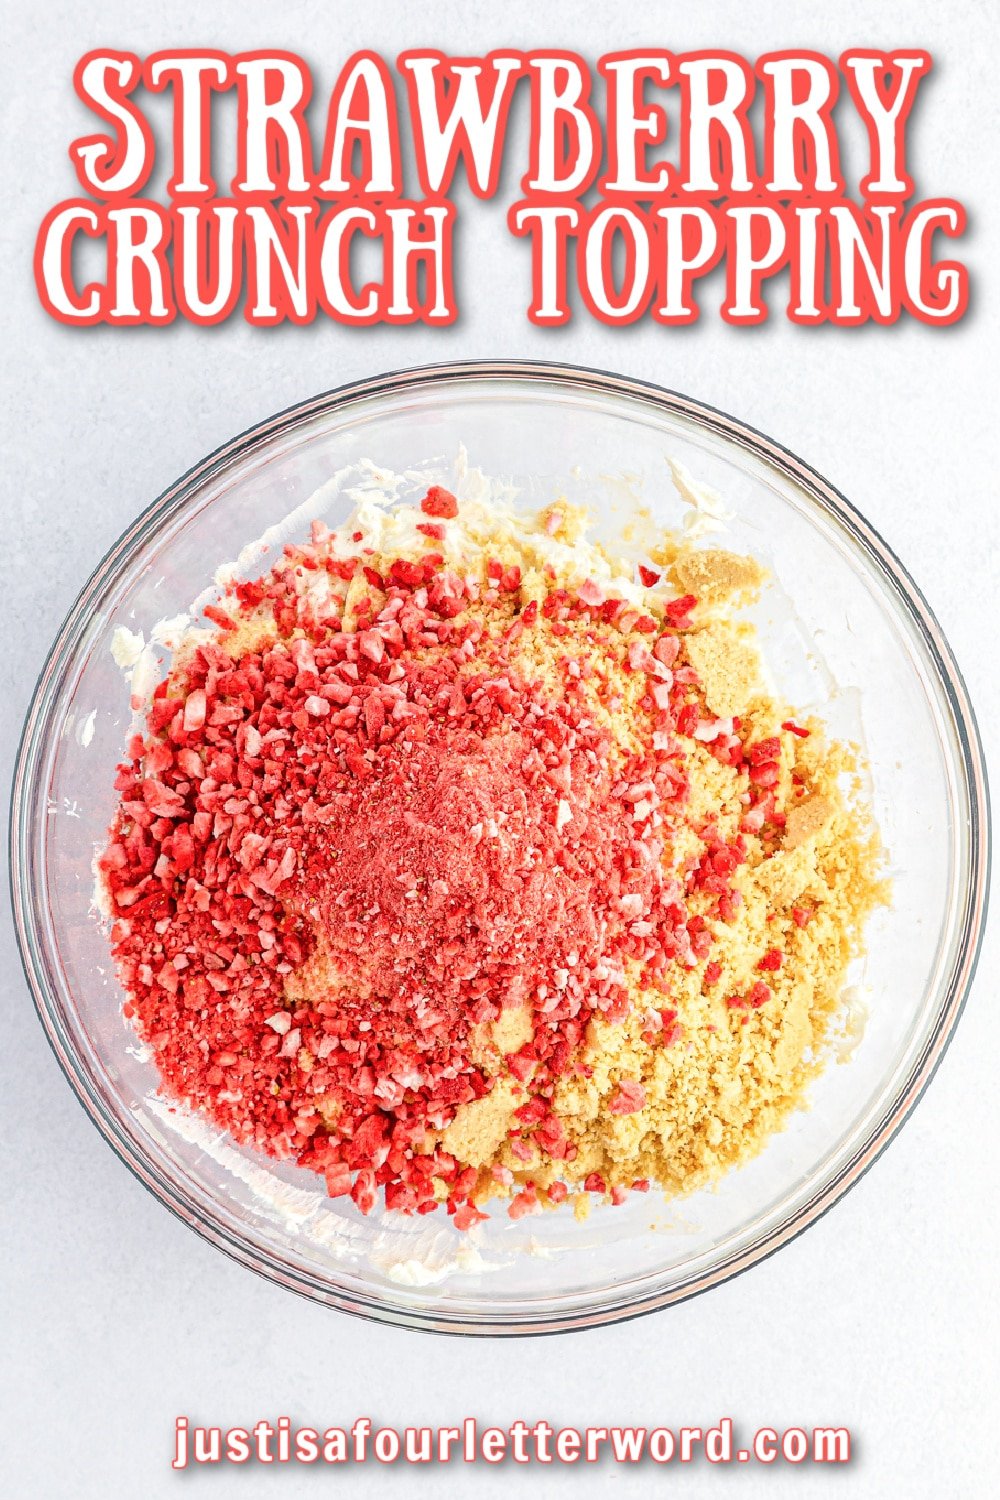 strawberry crunch topping with text